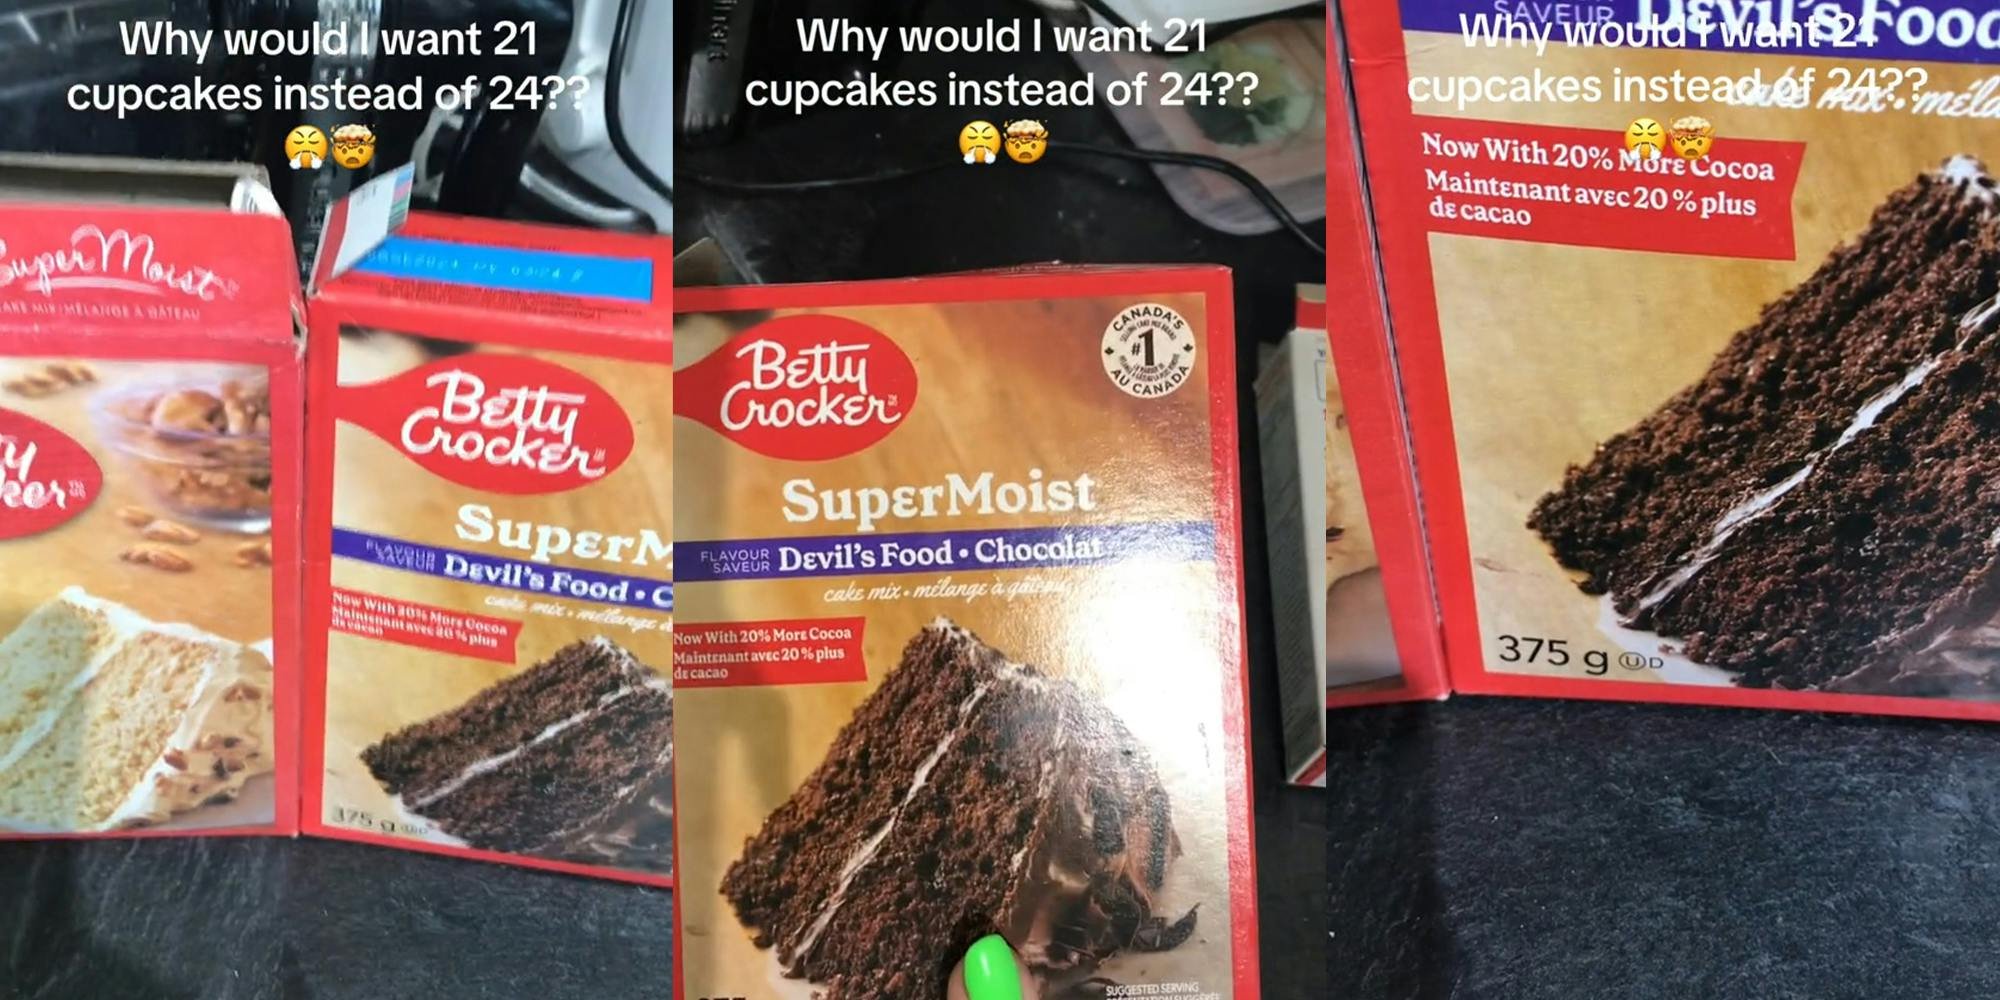 'You used to make 24 cupcakes': Baker exposes Betty Crocker 'shrinkflation' after product size decreases